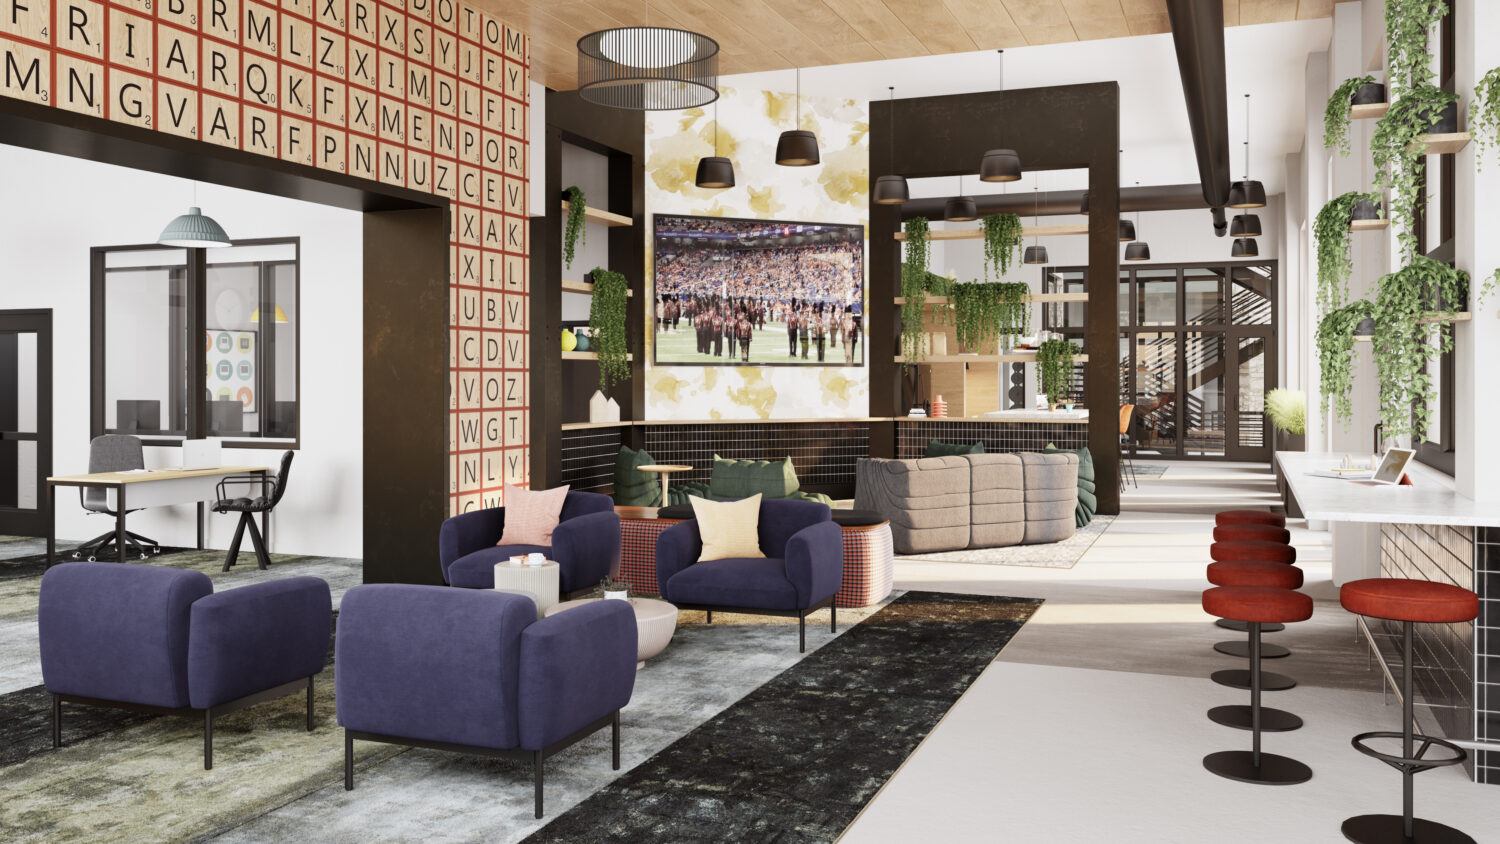 Lobby area with variety plush seating, bar seating, big-screen TV, and designer walls and lighting